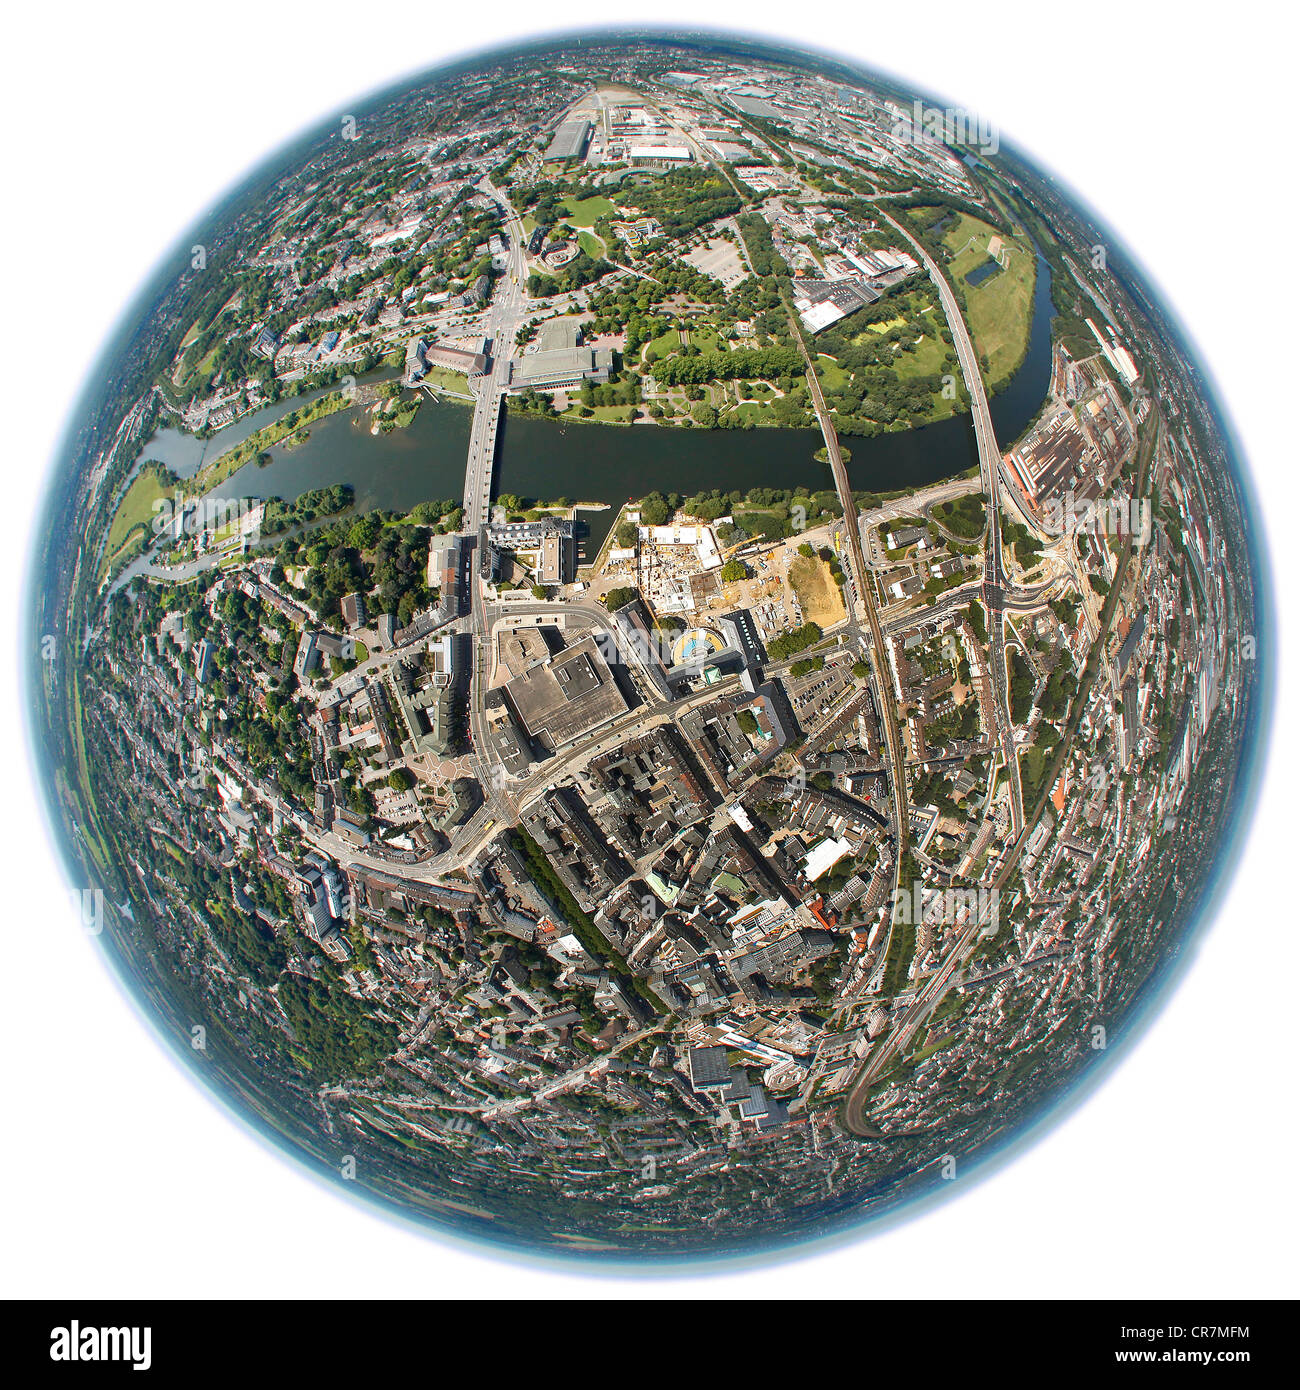 Aerial view, shot with a fisheye lens, rebuilding in the city centre, Ruhrbania project, Muelheim an der Ruhr, Ruhr area Stock Photo